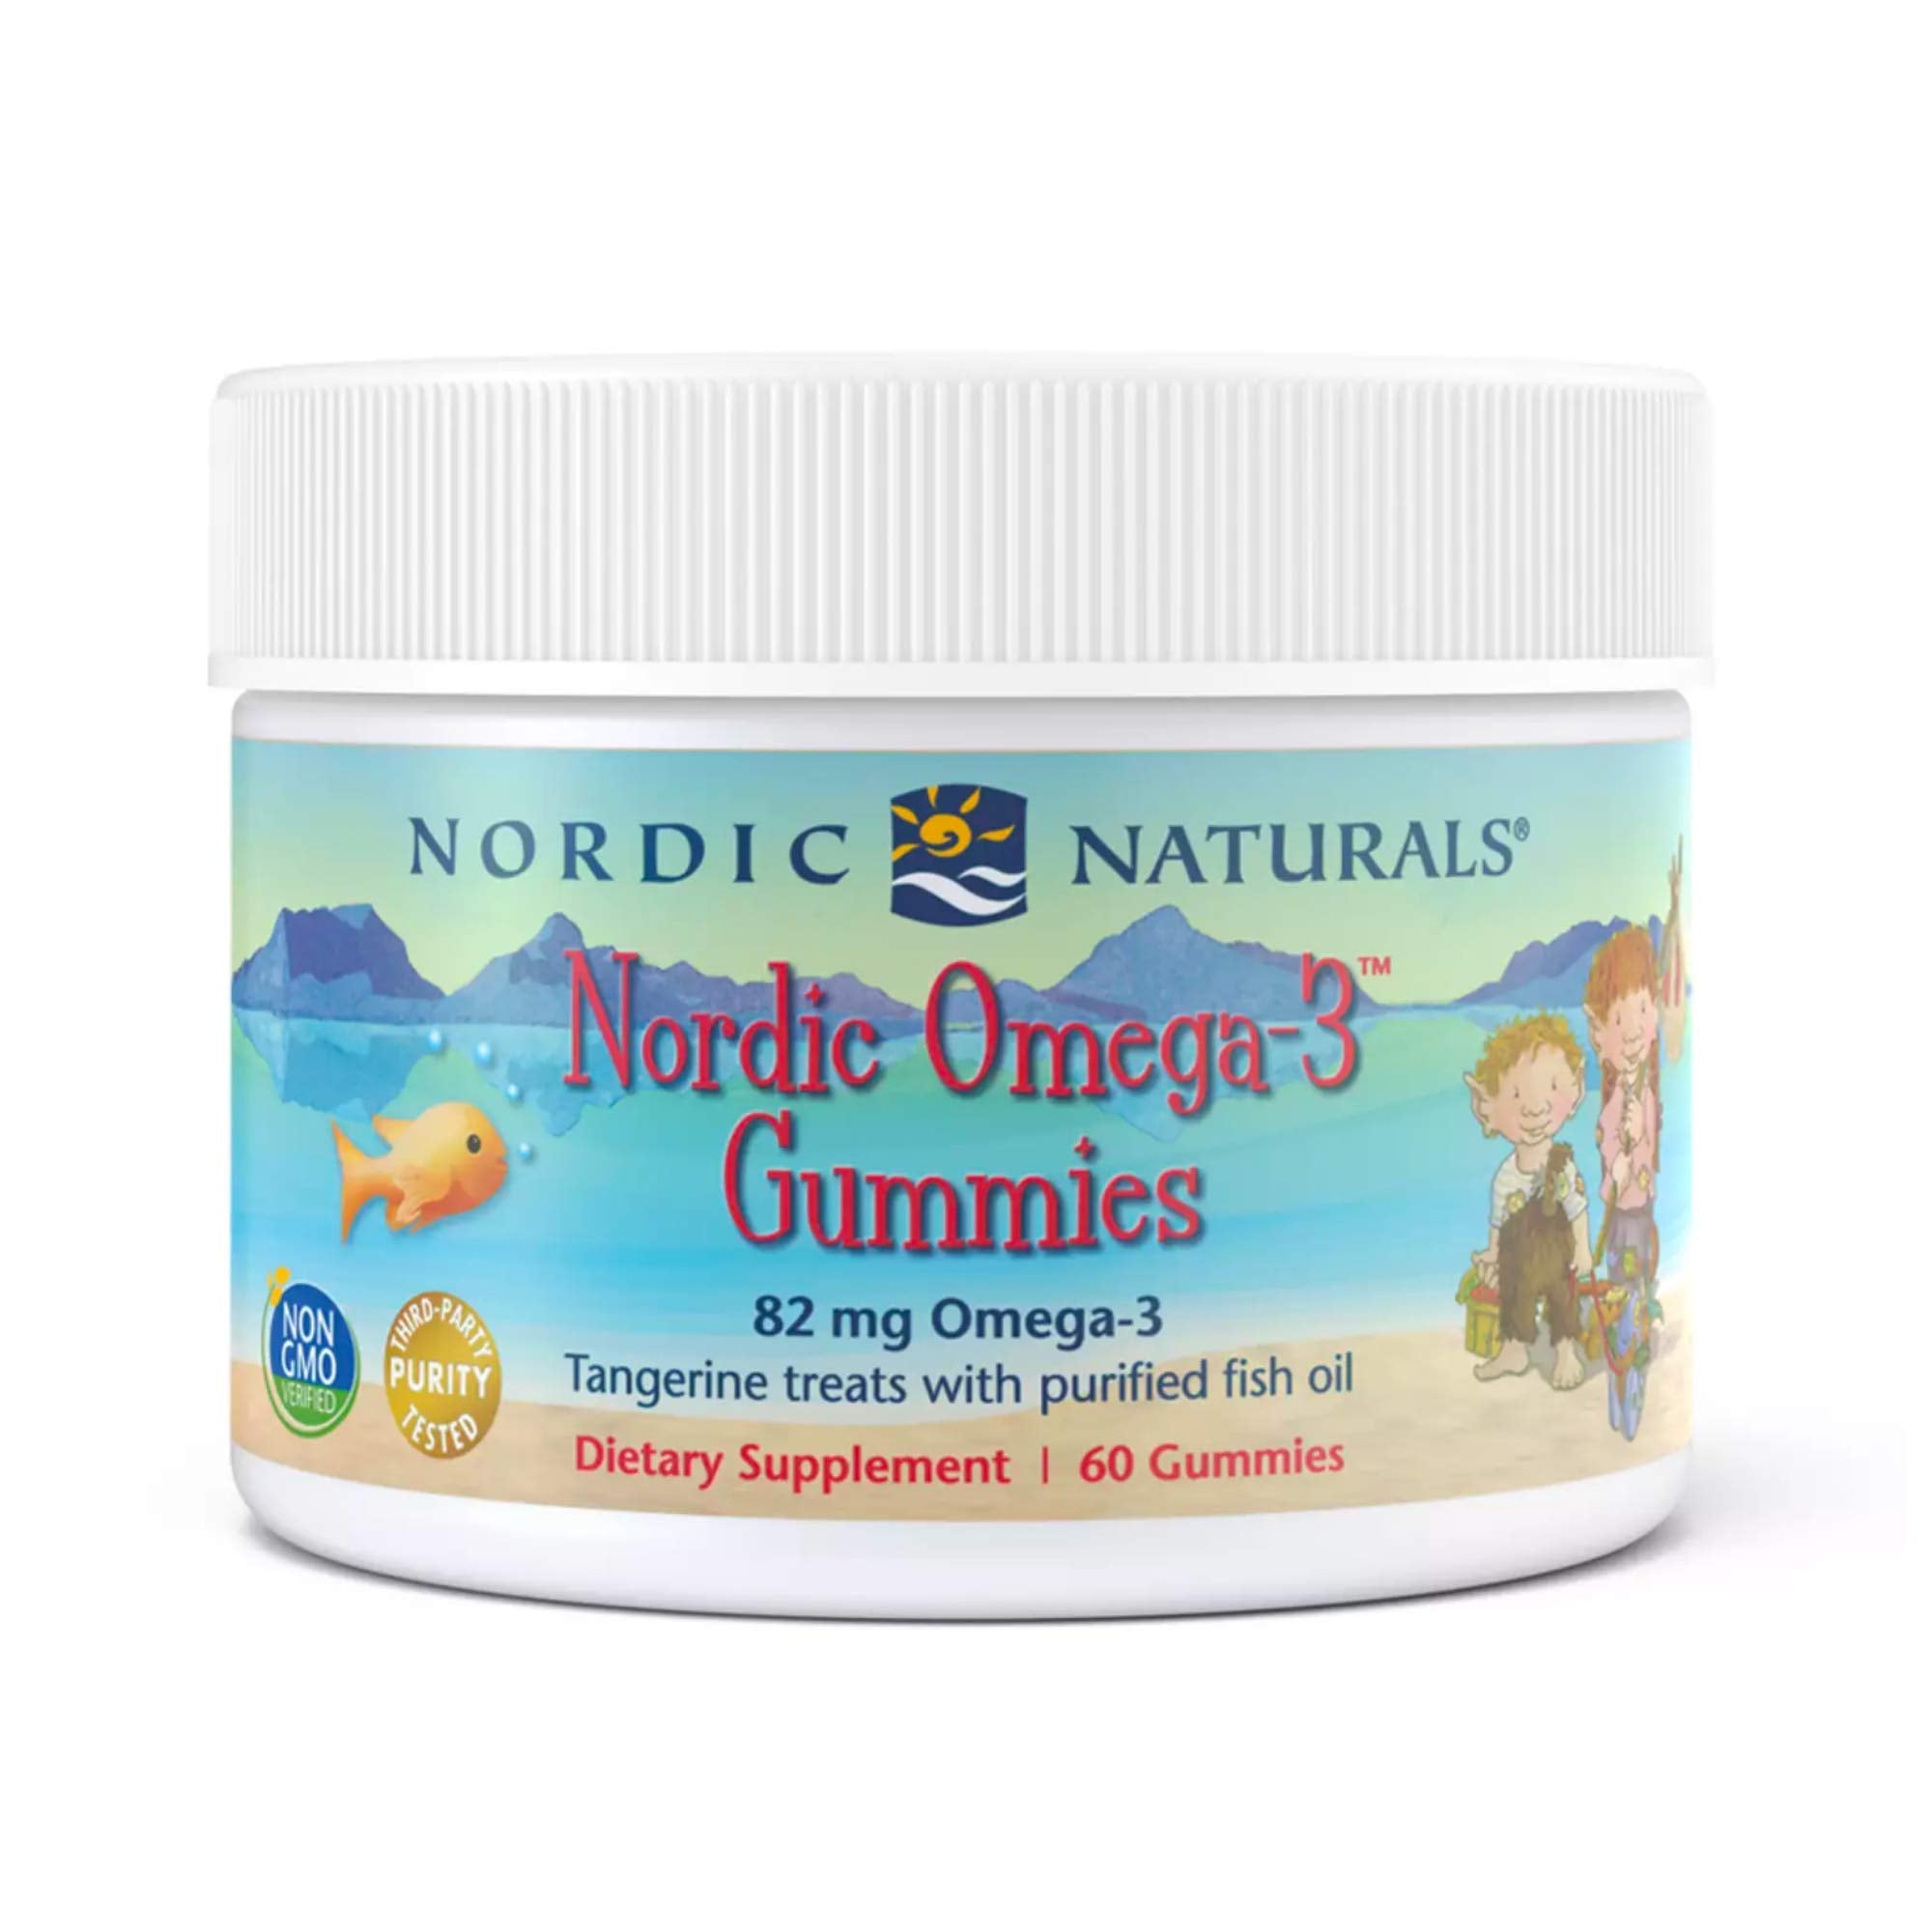 Nordic Naturals - Nordic Omega-3 Gummies, Supports Optimal Brain and Immune Function, 60 Count